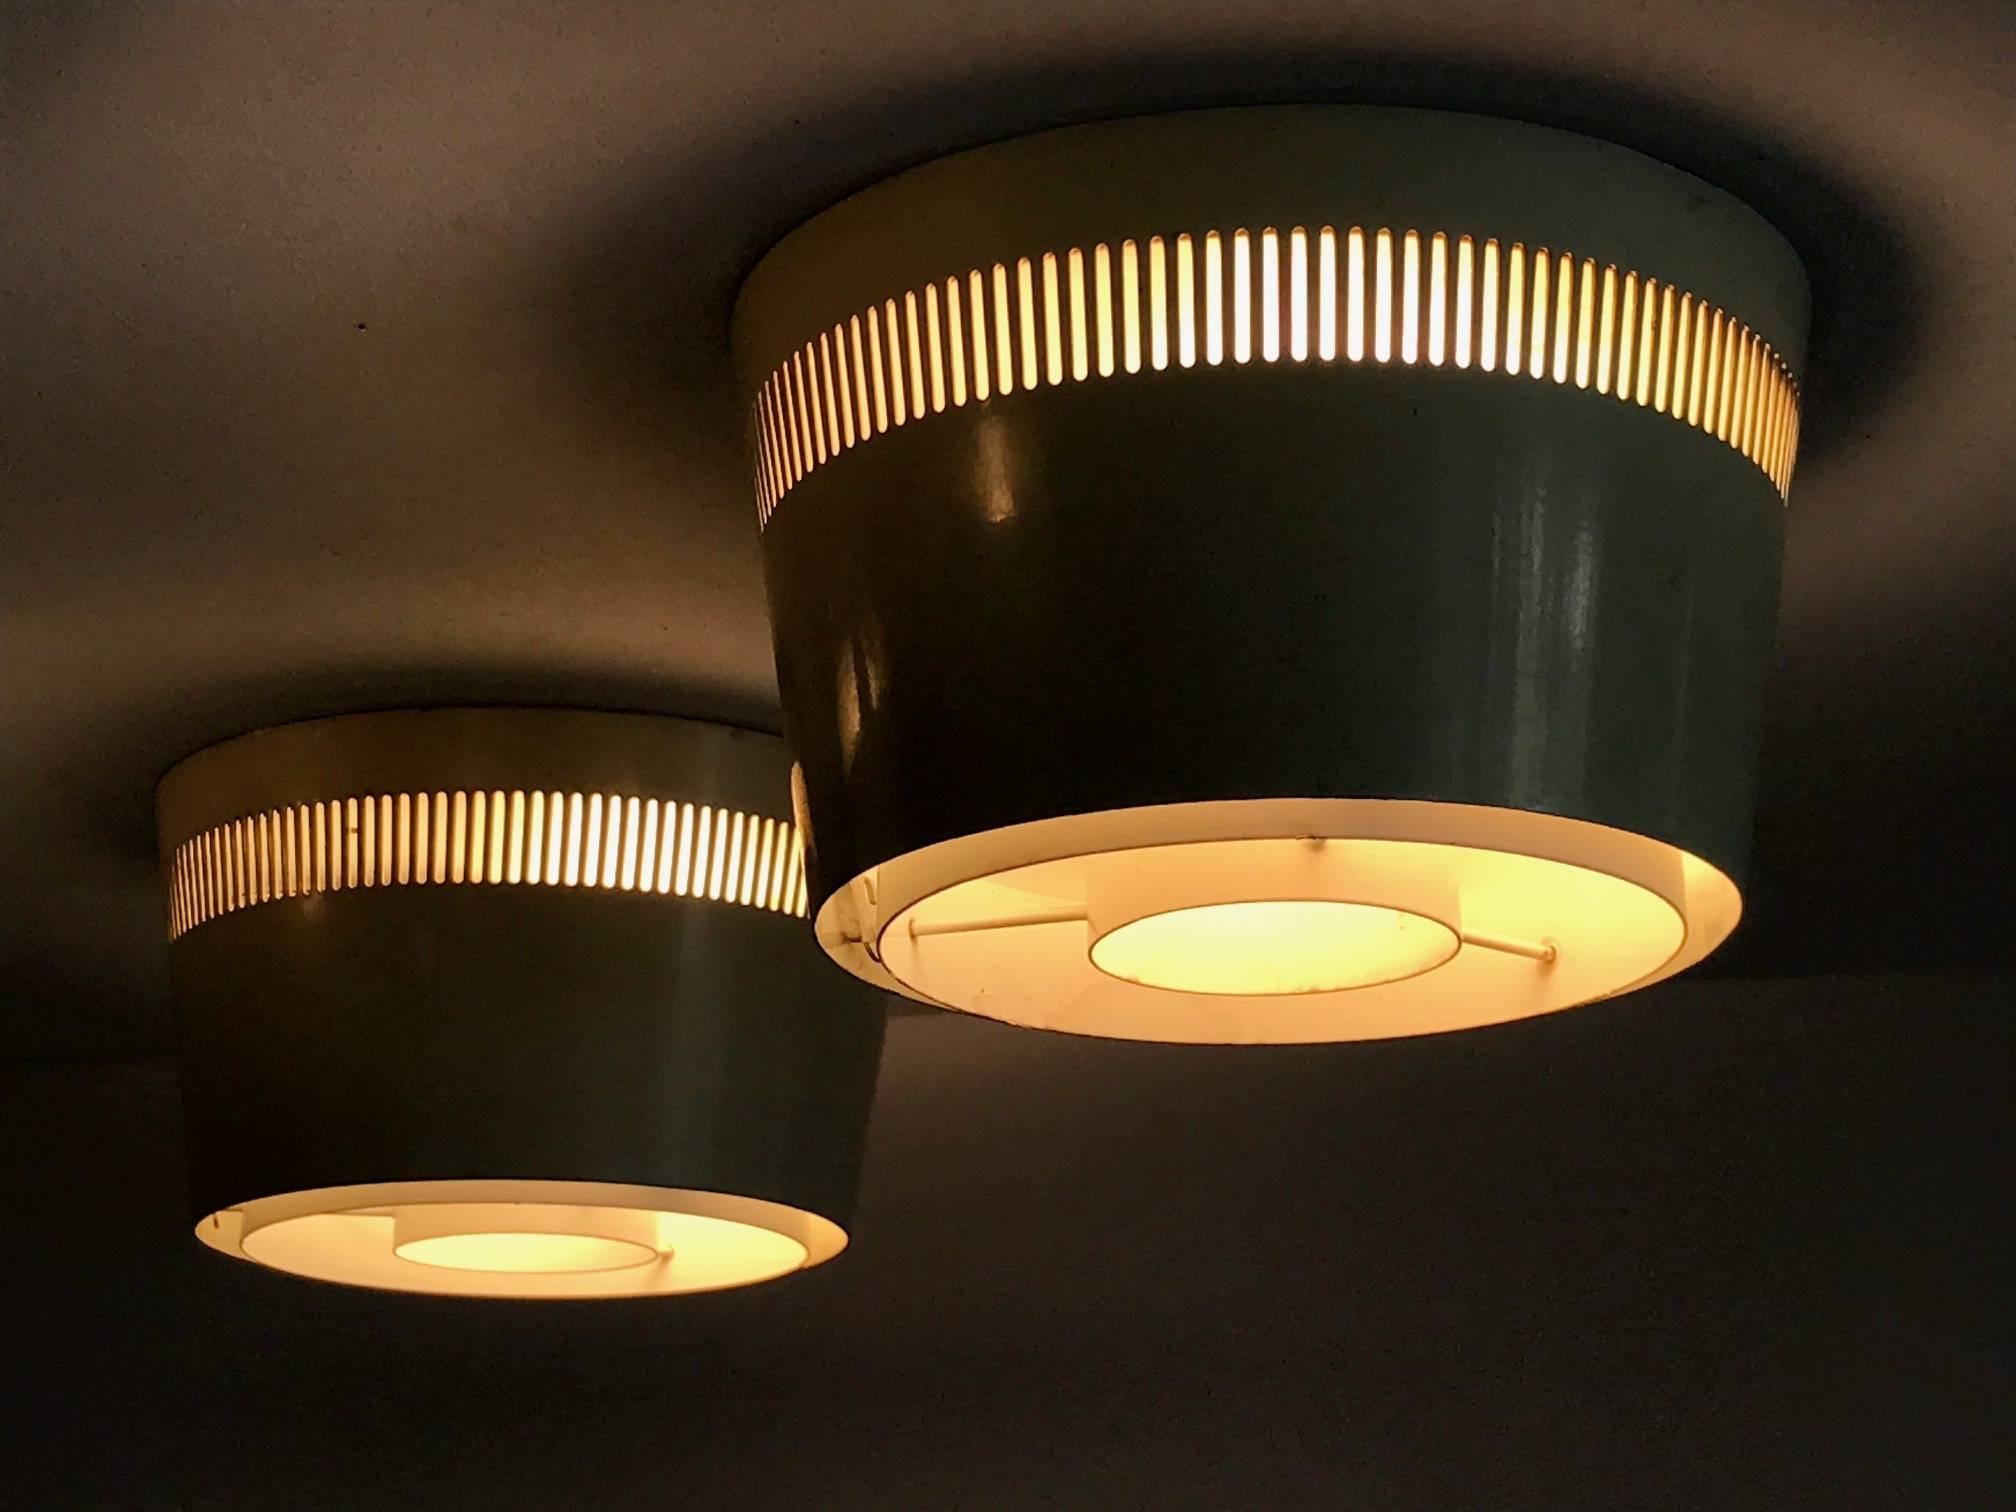 A set of interesting ceiling lights by Itsu, Finland, circa 1950s. Perforated metal, original paint, could be used as sconces or ceiling lights and arranged in any pattern.